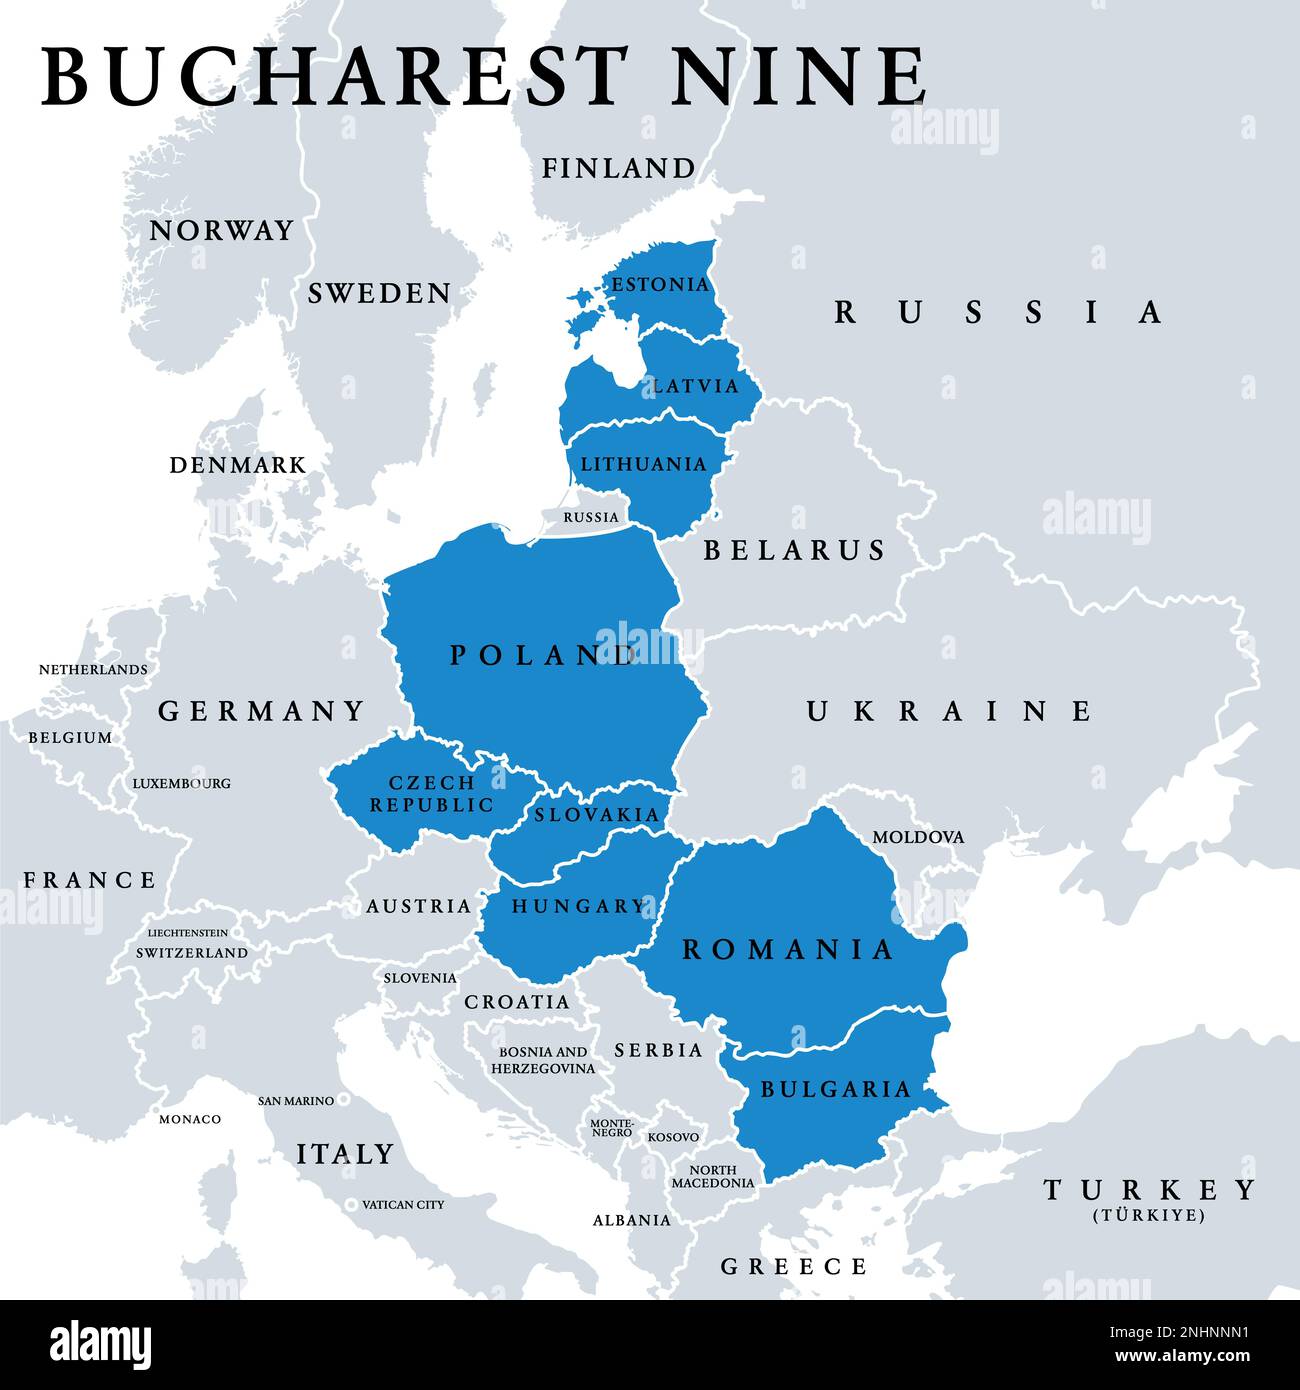 Bucharest Nine members, or Bucharest Format, political map. Organization of former Soviet Union countries. Stock Photo